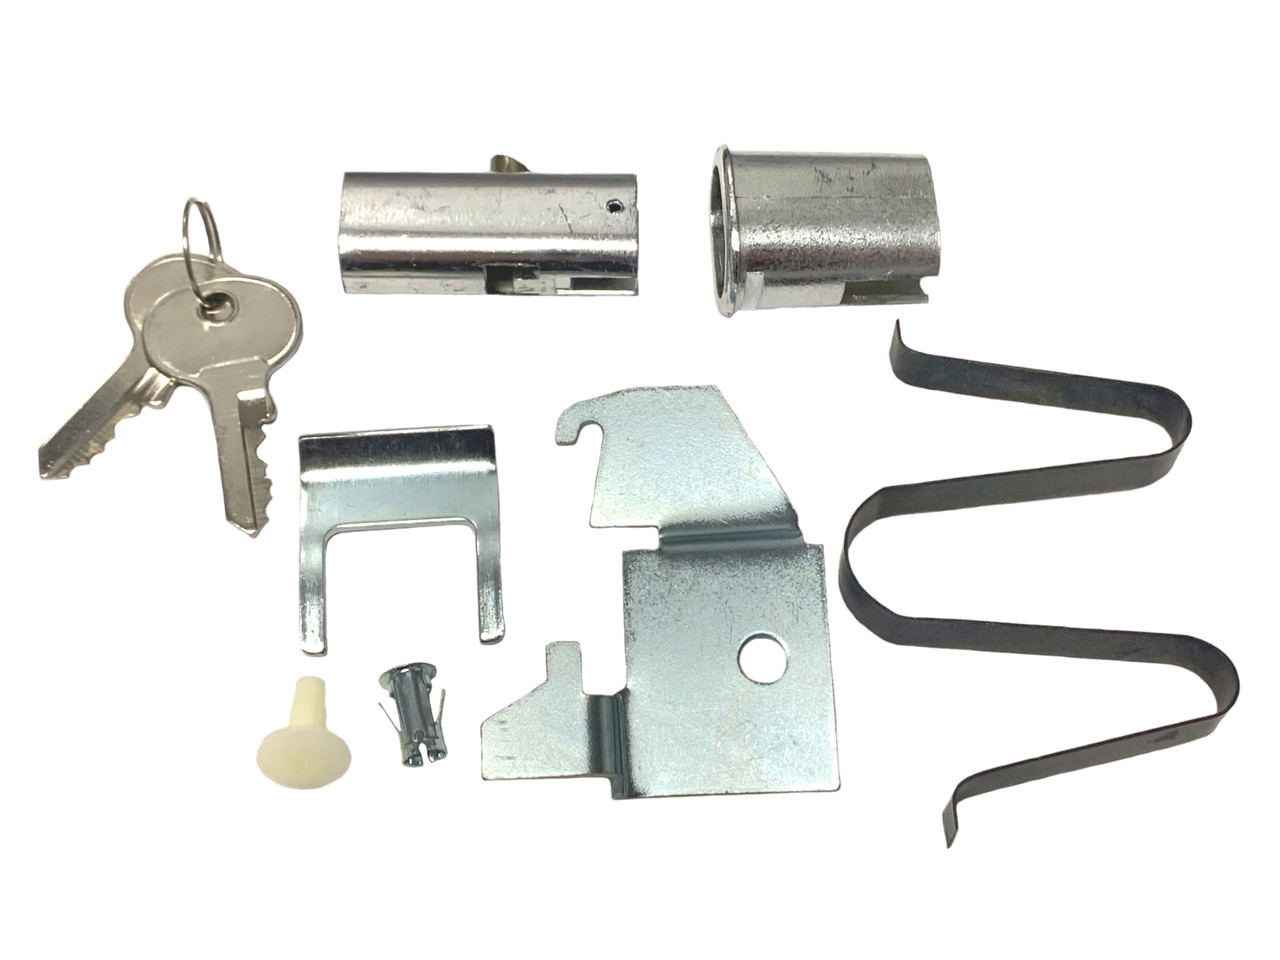 2190 Lock Kit for File Cabinet Fits HON F26 Styles, Keyed Different